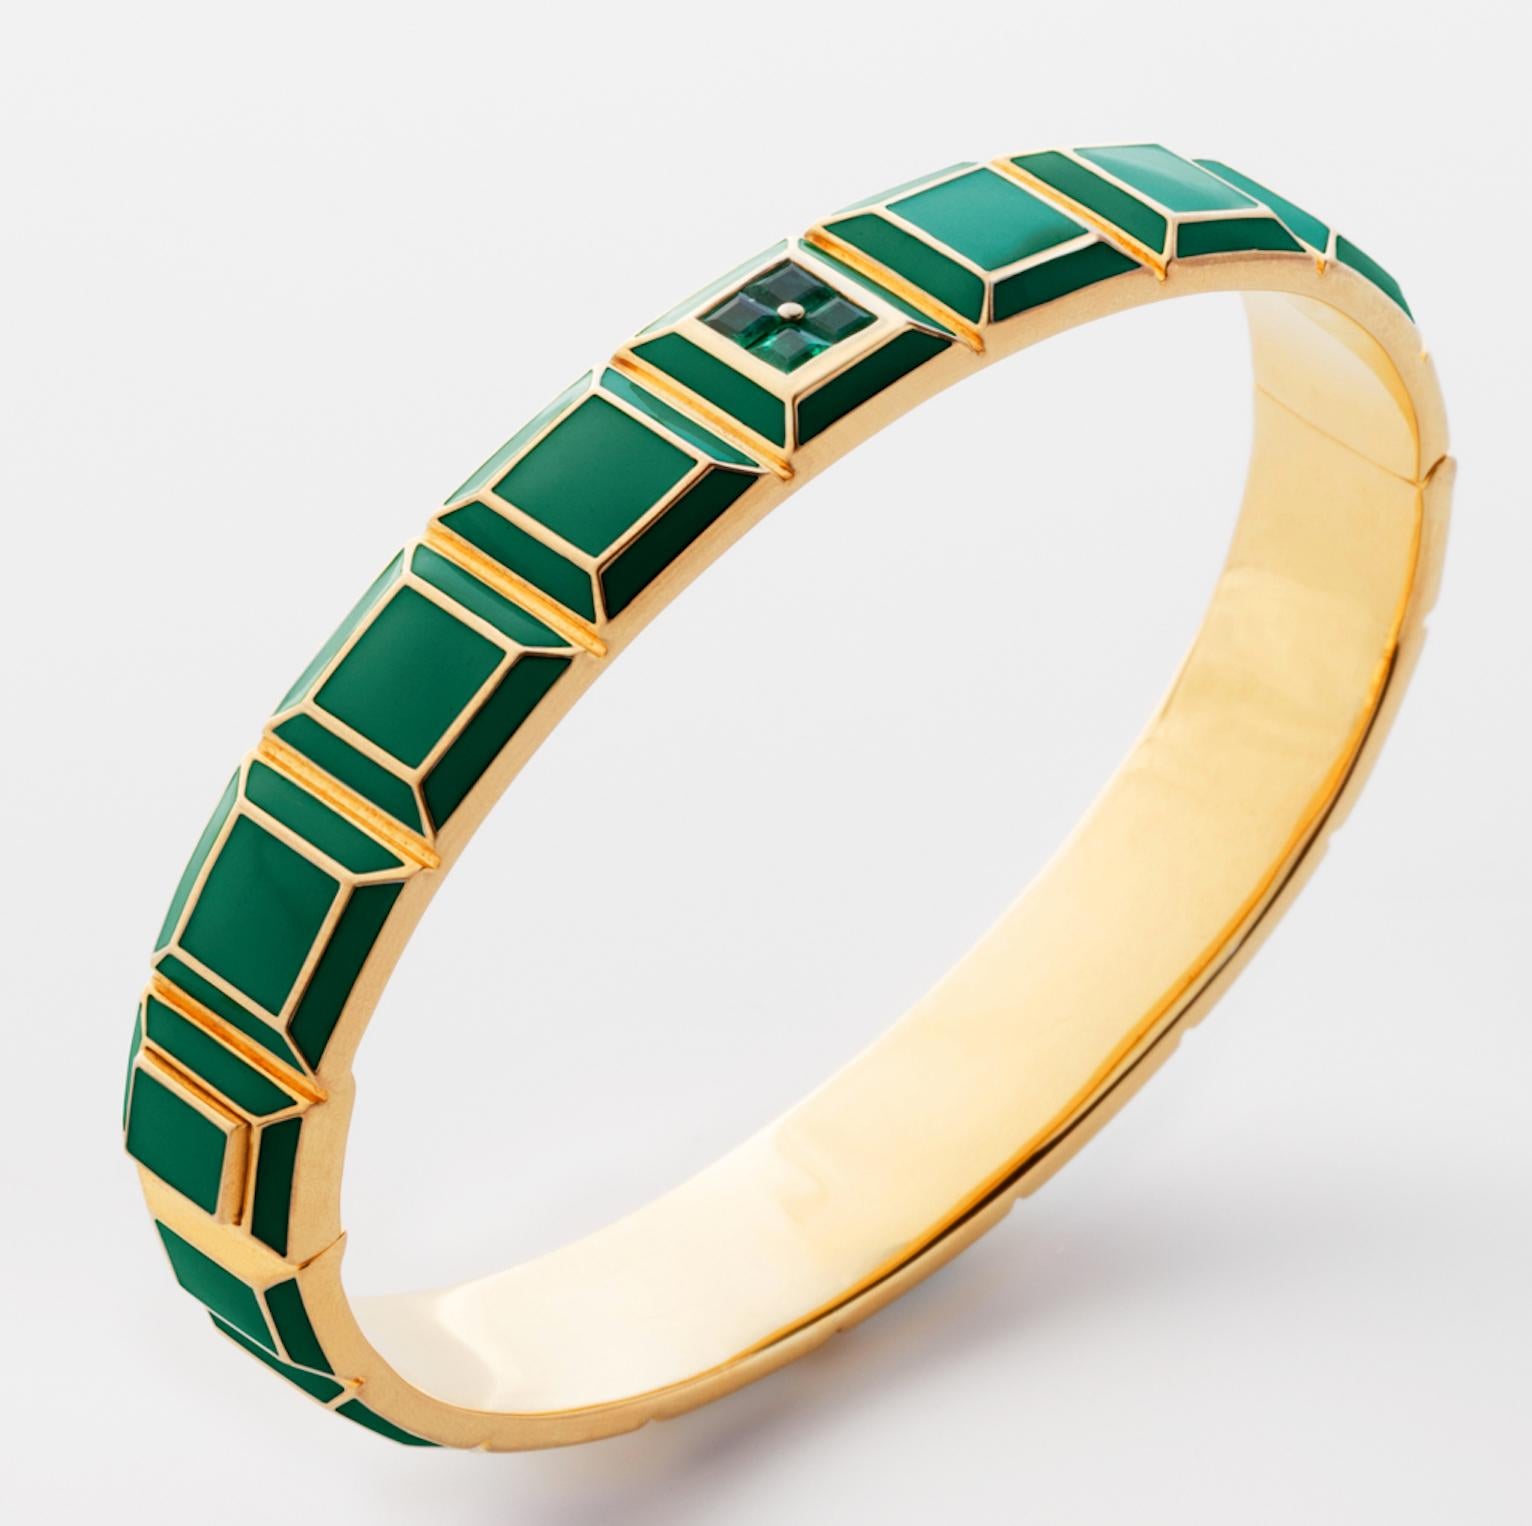 Gold-Plated Enamel Carousel Bracelet features a Yellow Gold Plated Silver bracelet with green enamel and emeralds, along with a clasp closure that secures the bracelet onto the wearer's wrist. 
Yellow Gold Plated Silver, Green Enamel, Emeralds